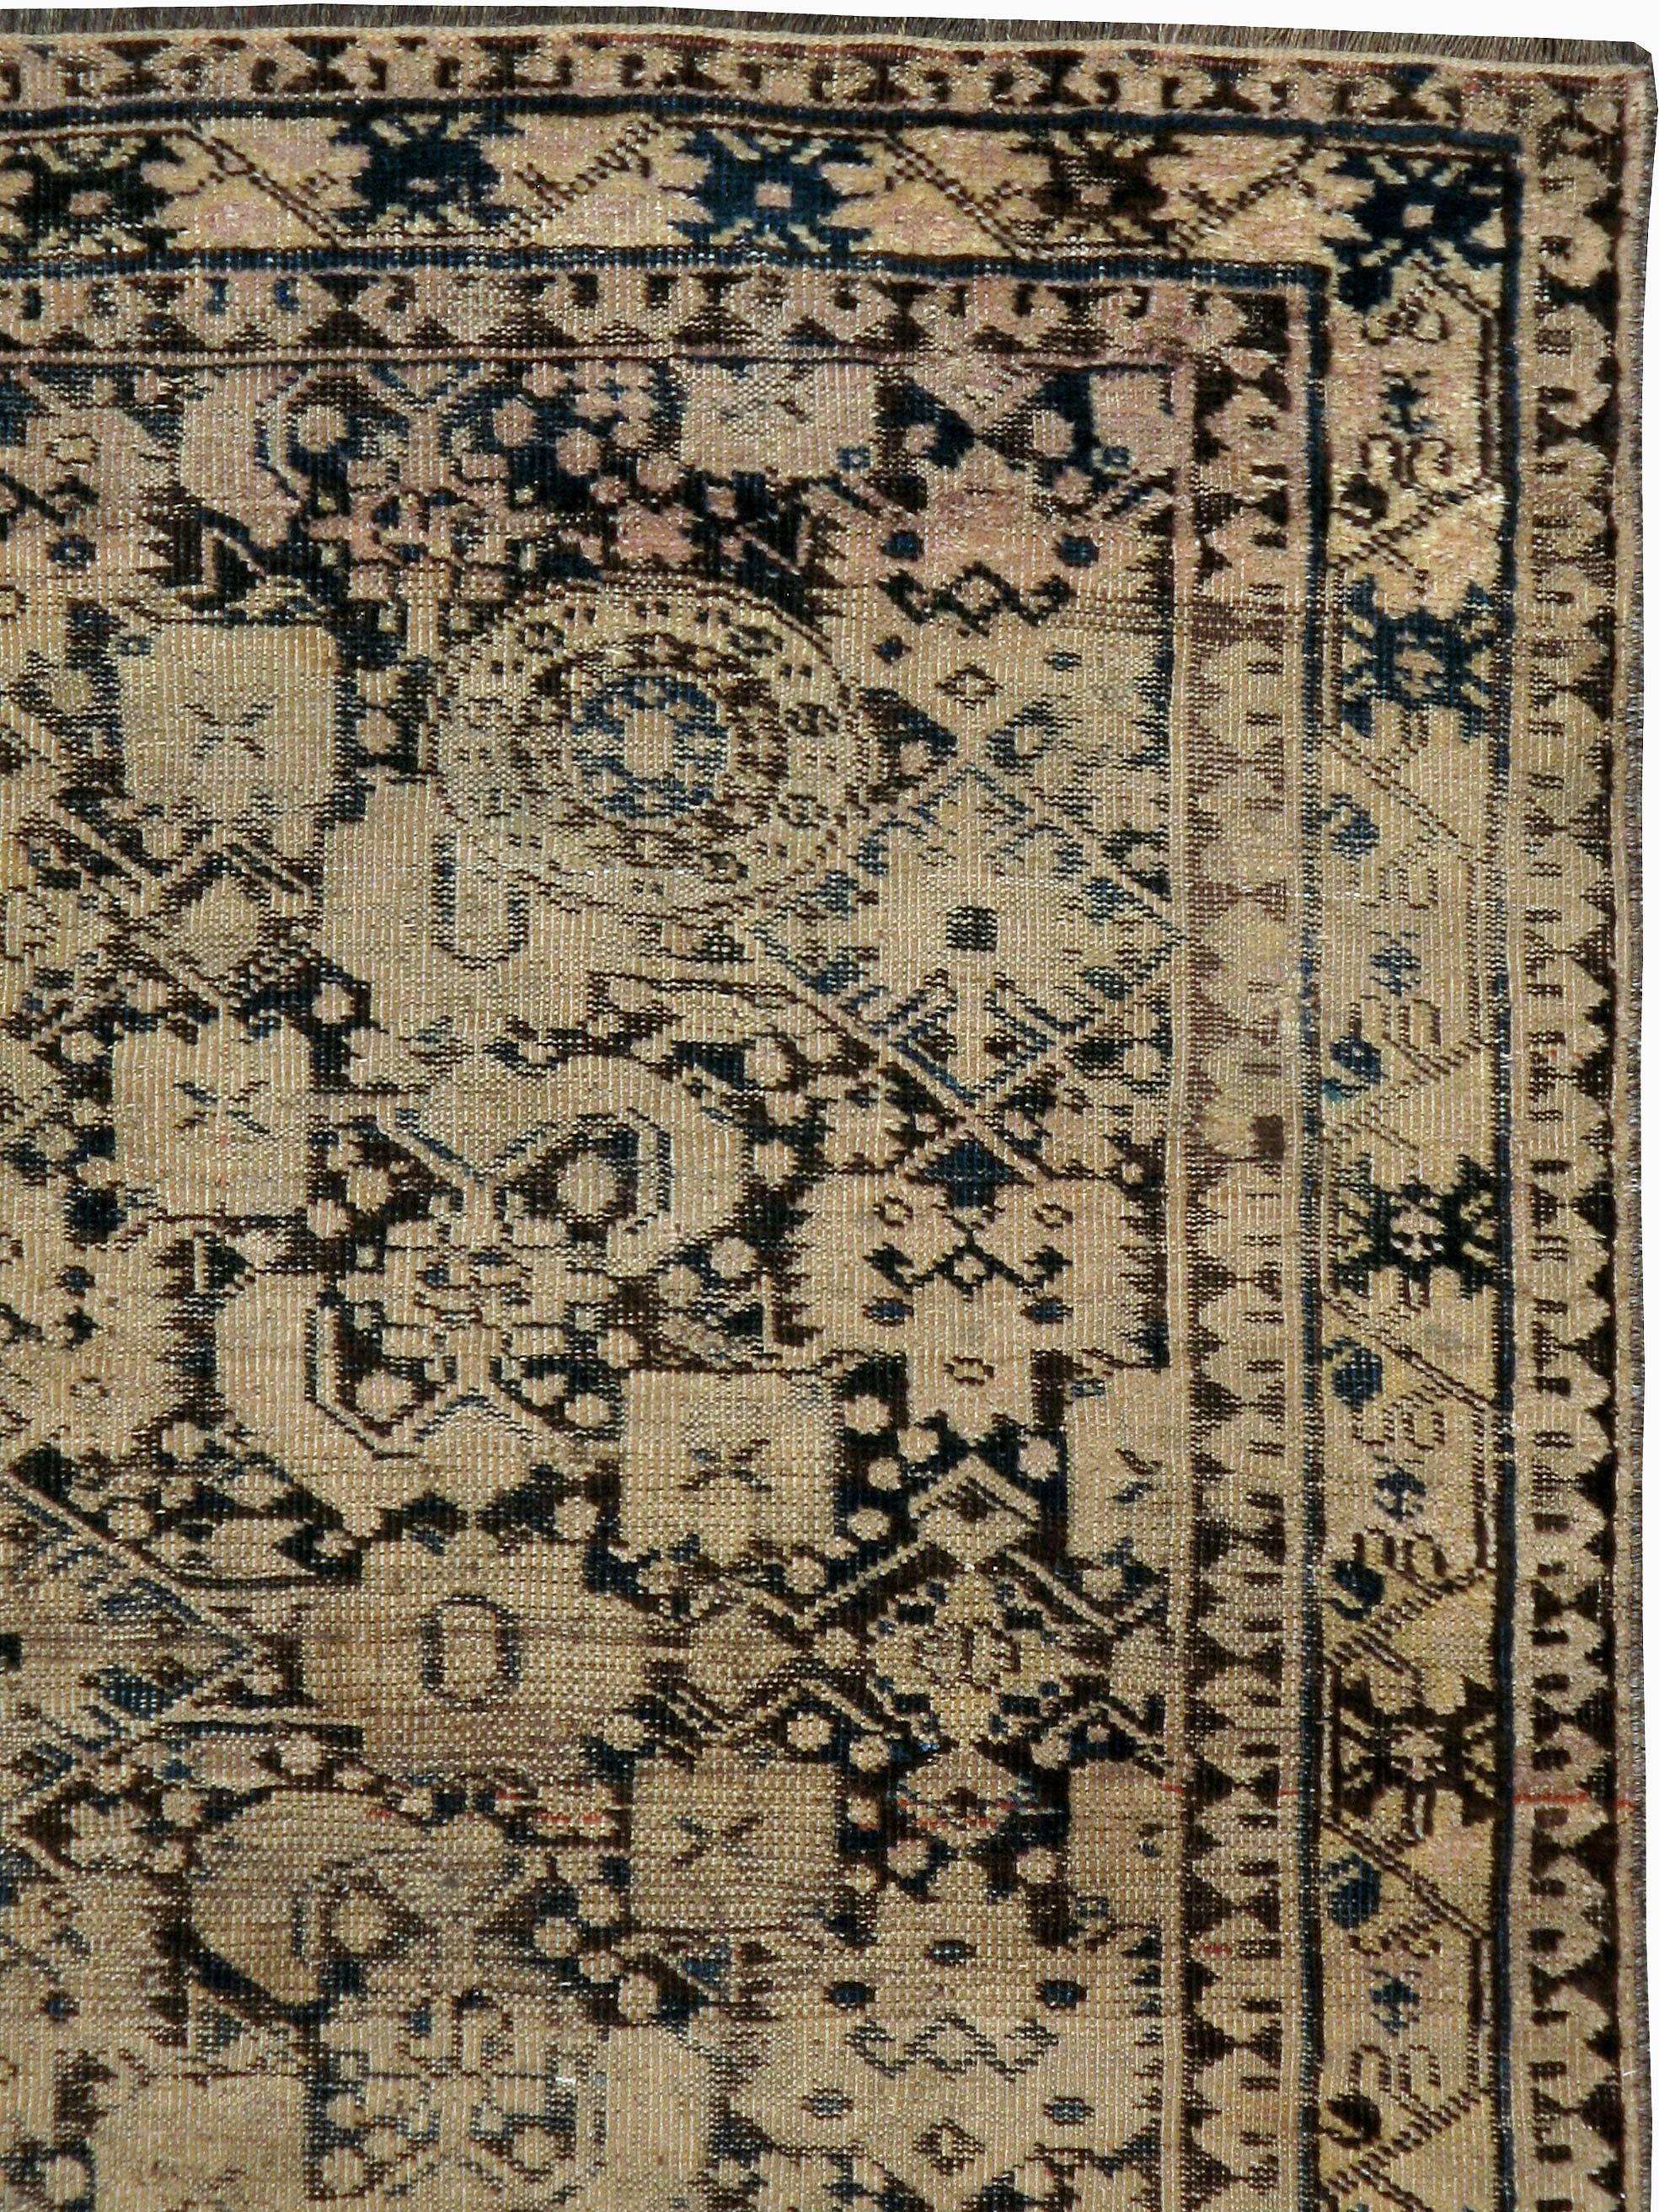 antique central asian rugs